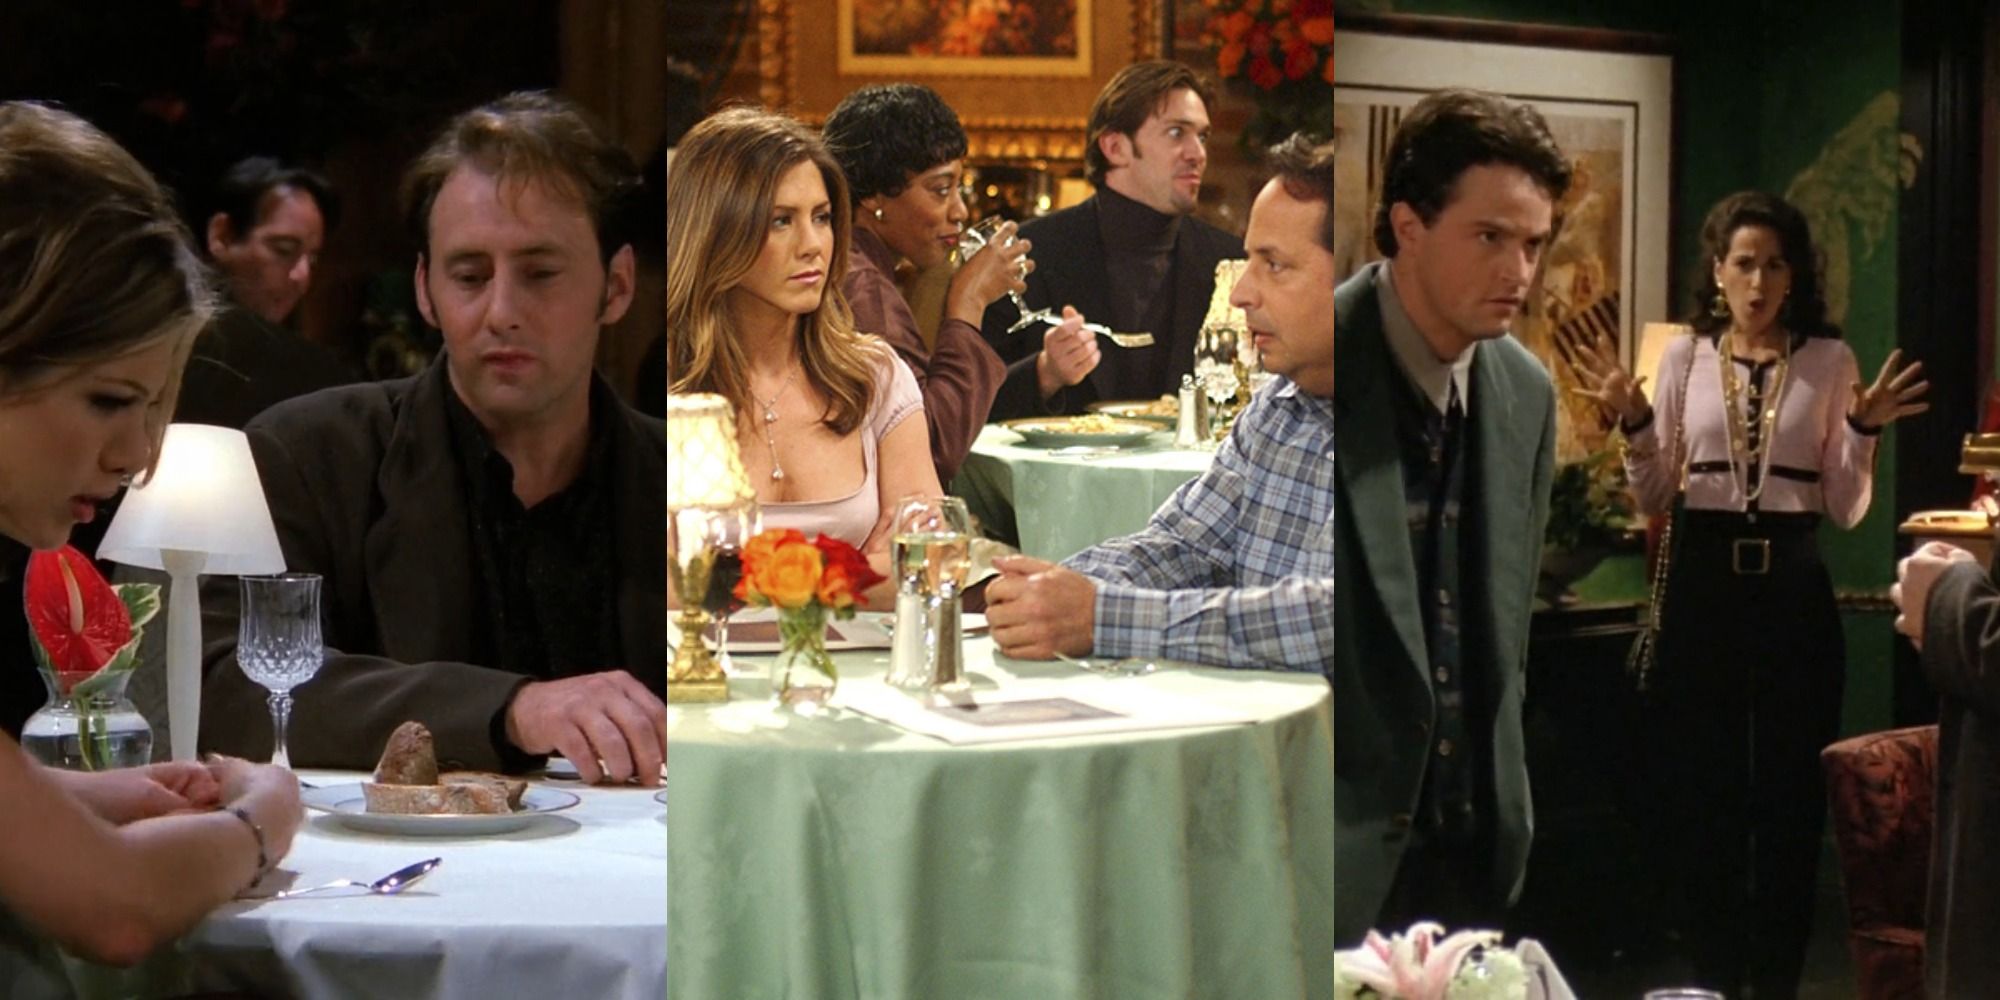 Main feature image showing Rachel and Chandler's blind dates in restaurants in Friends